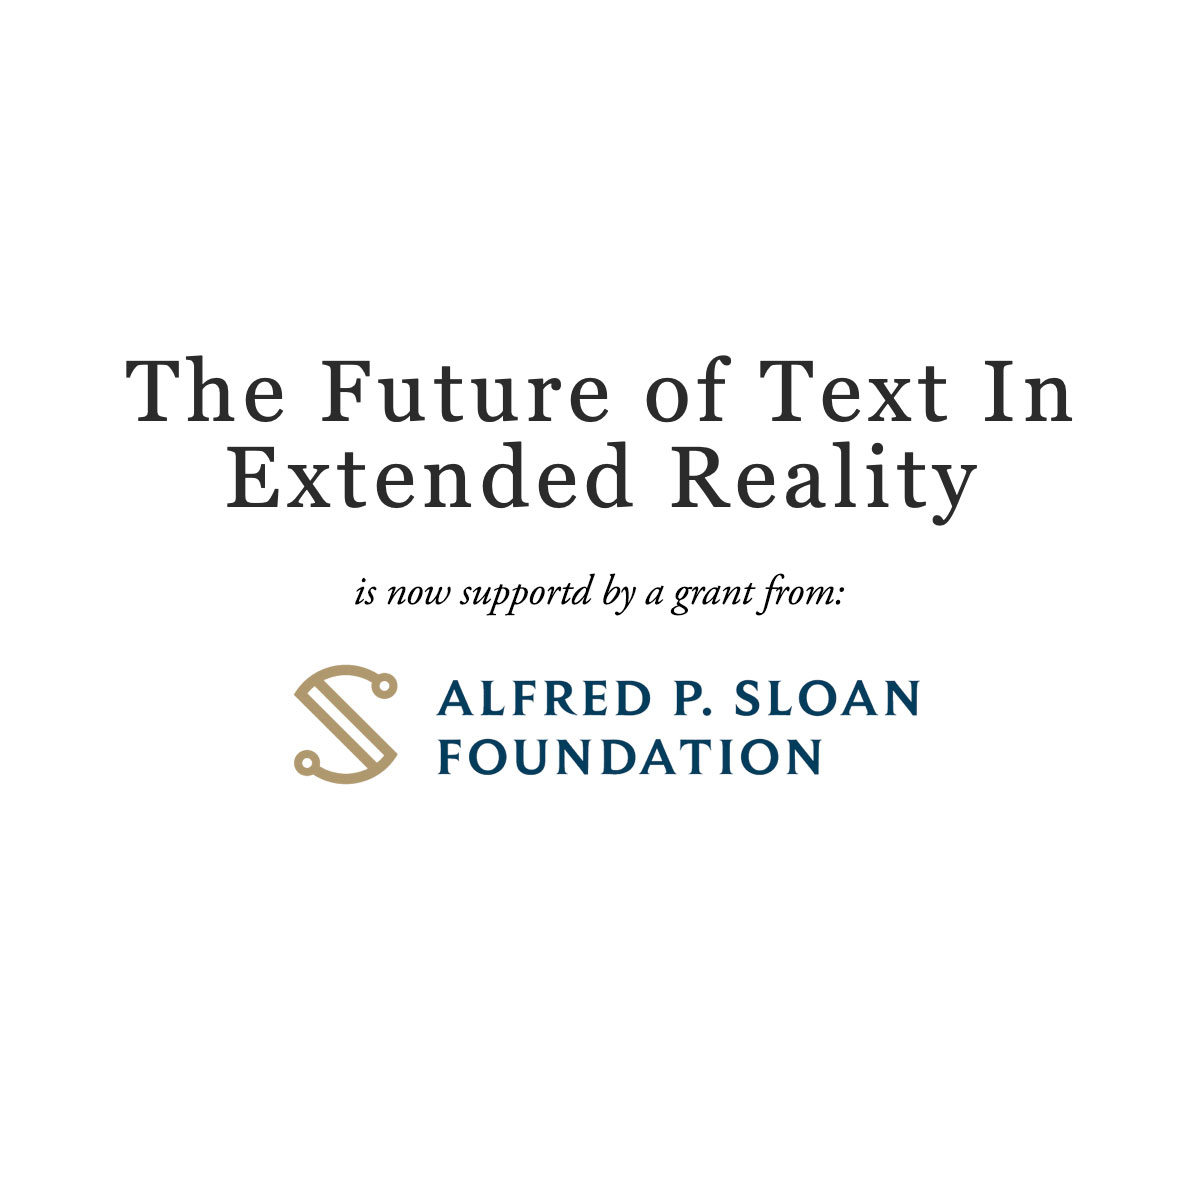 I am very grateful to announce that The Future of Text is now supported by a generous grant from the Alfred P. Sloan Foundation through a project with Dene Grigar @dgrigar.

thefutureoftext.org/xr/